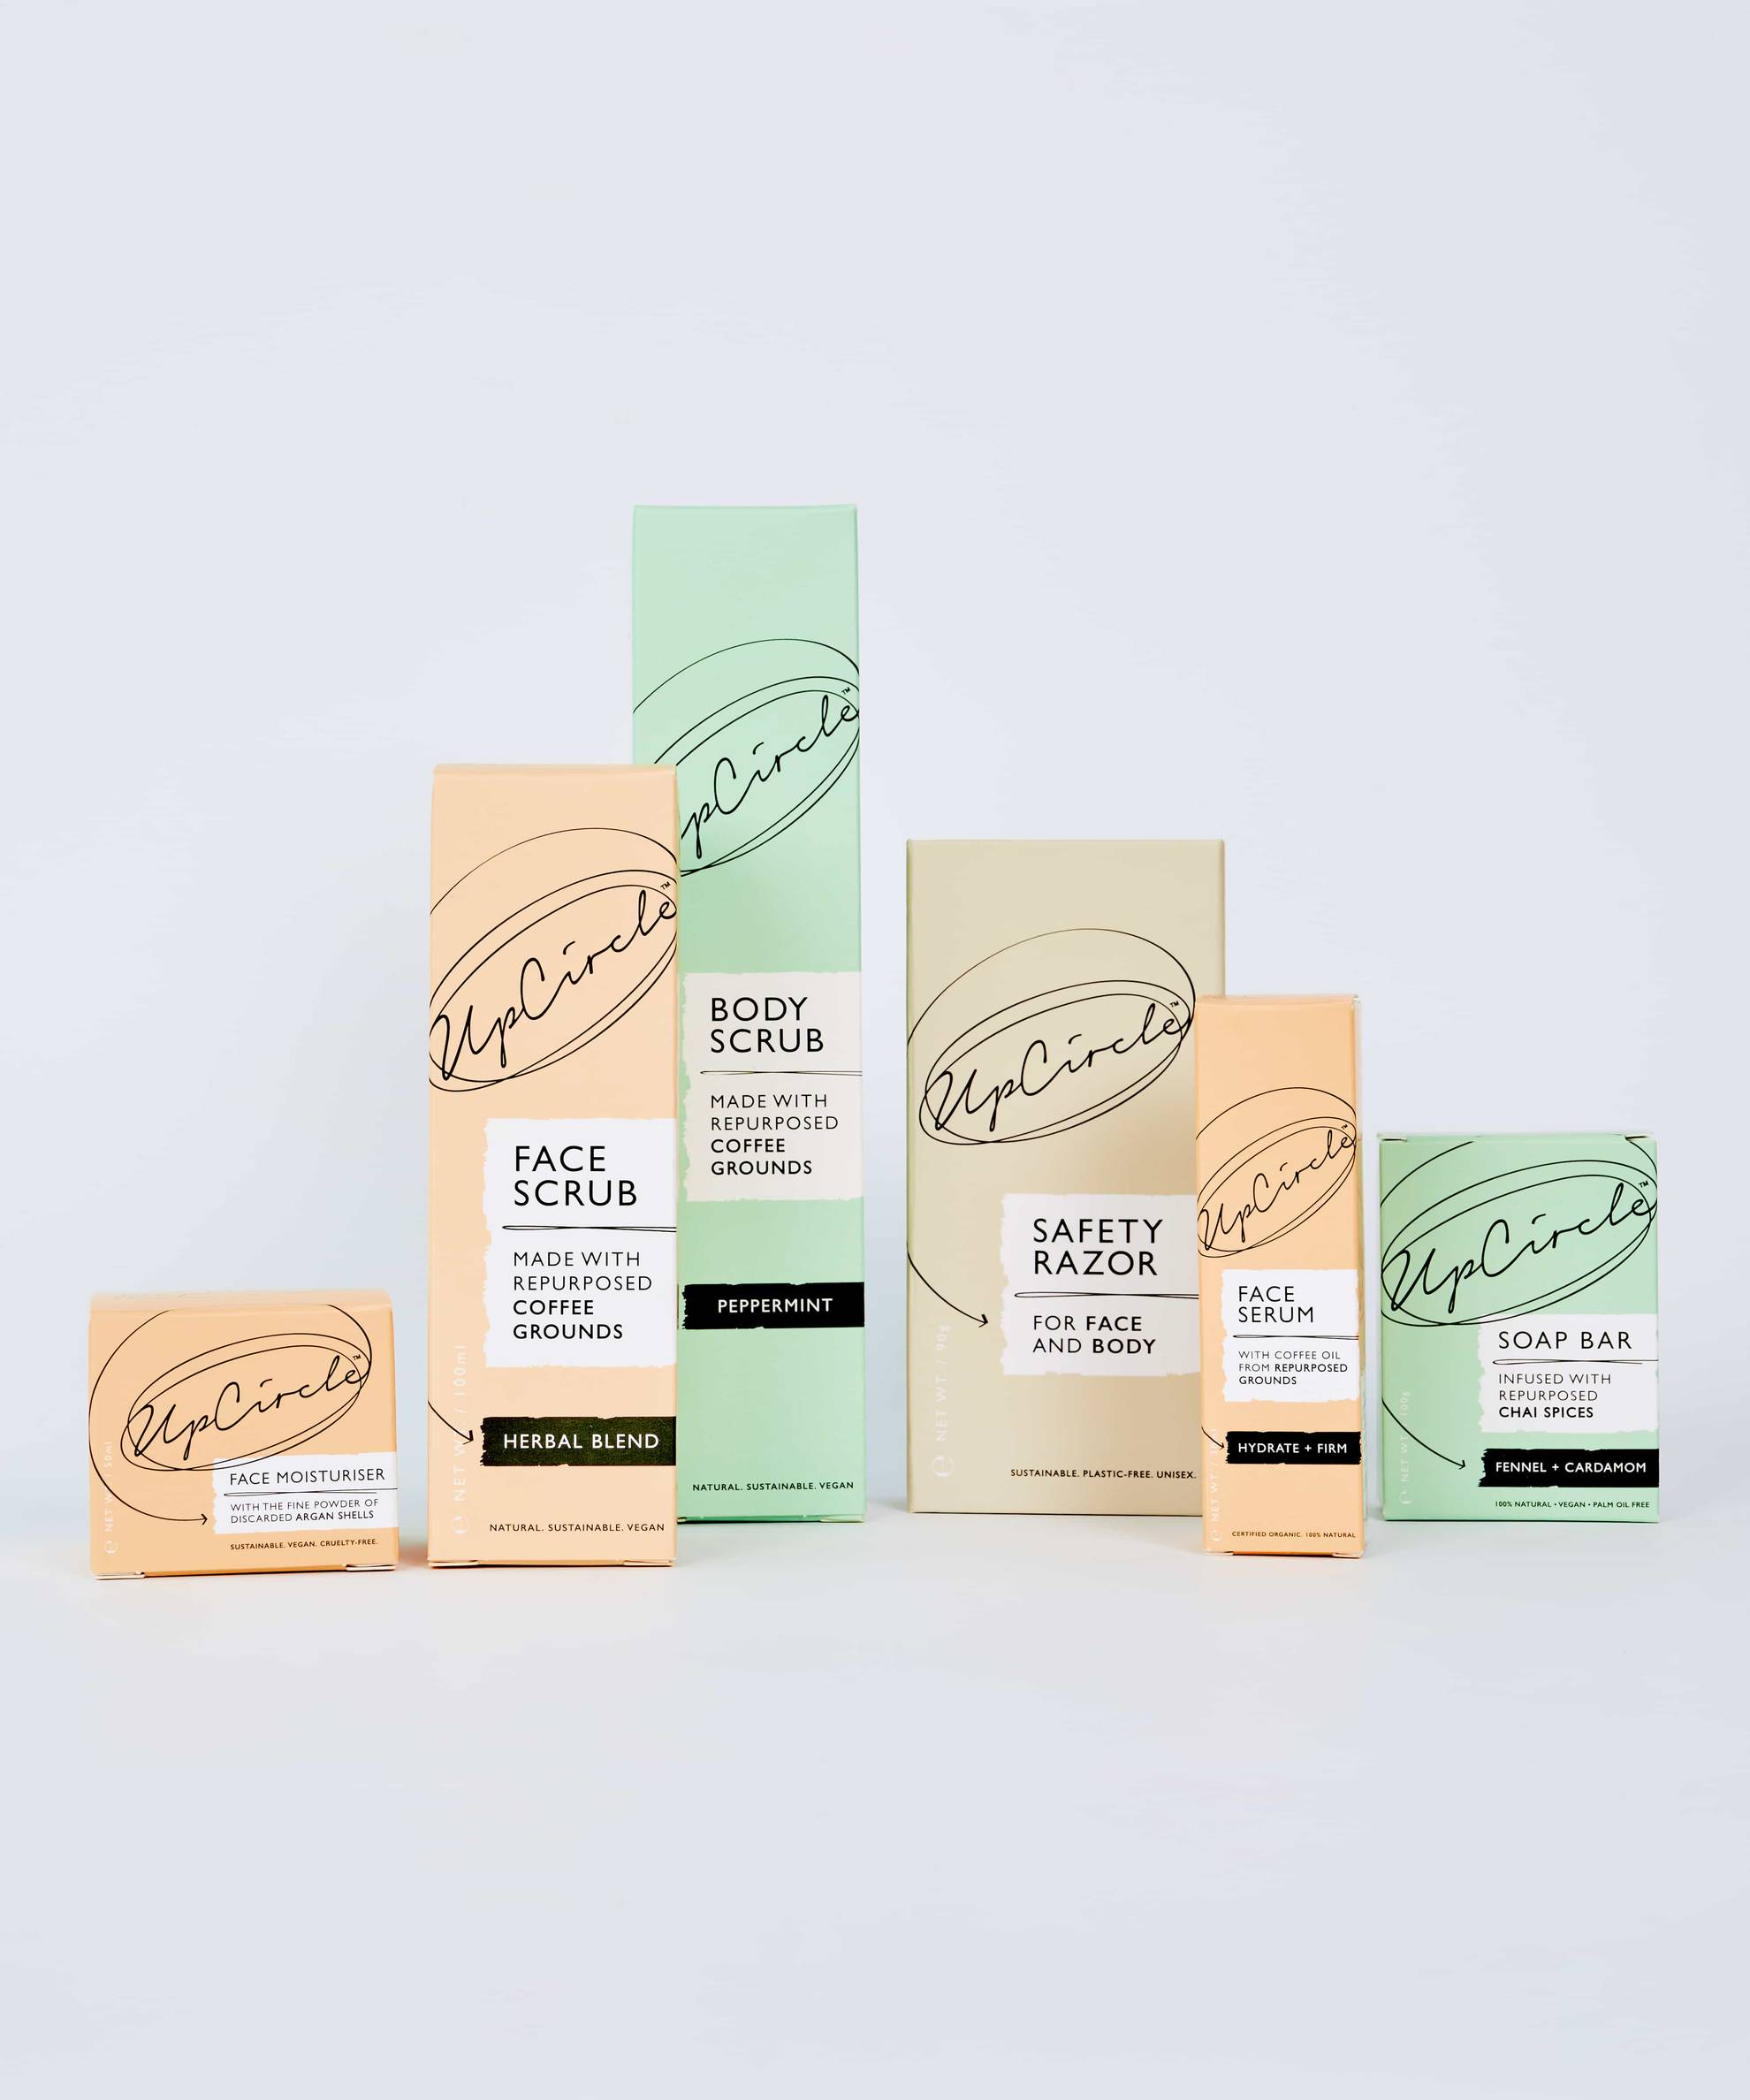 upcircle products for father's day in pastel packaging